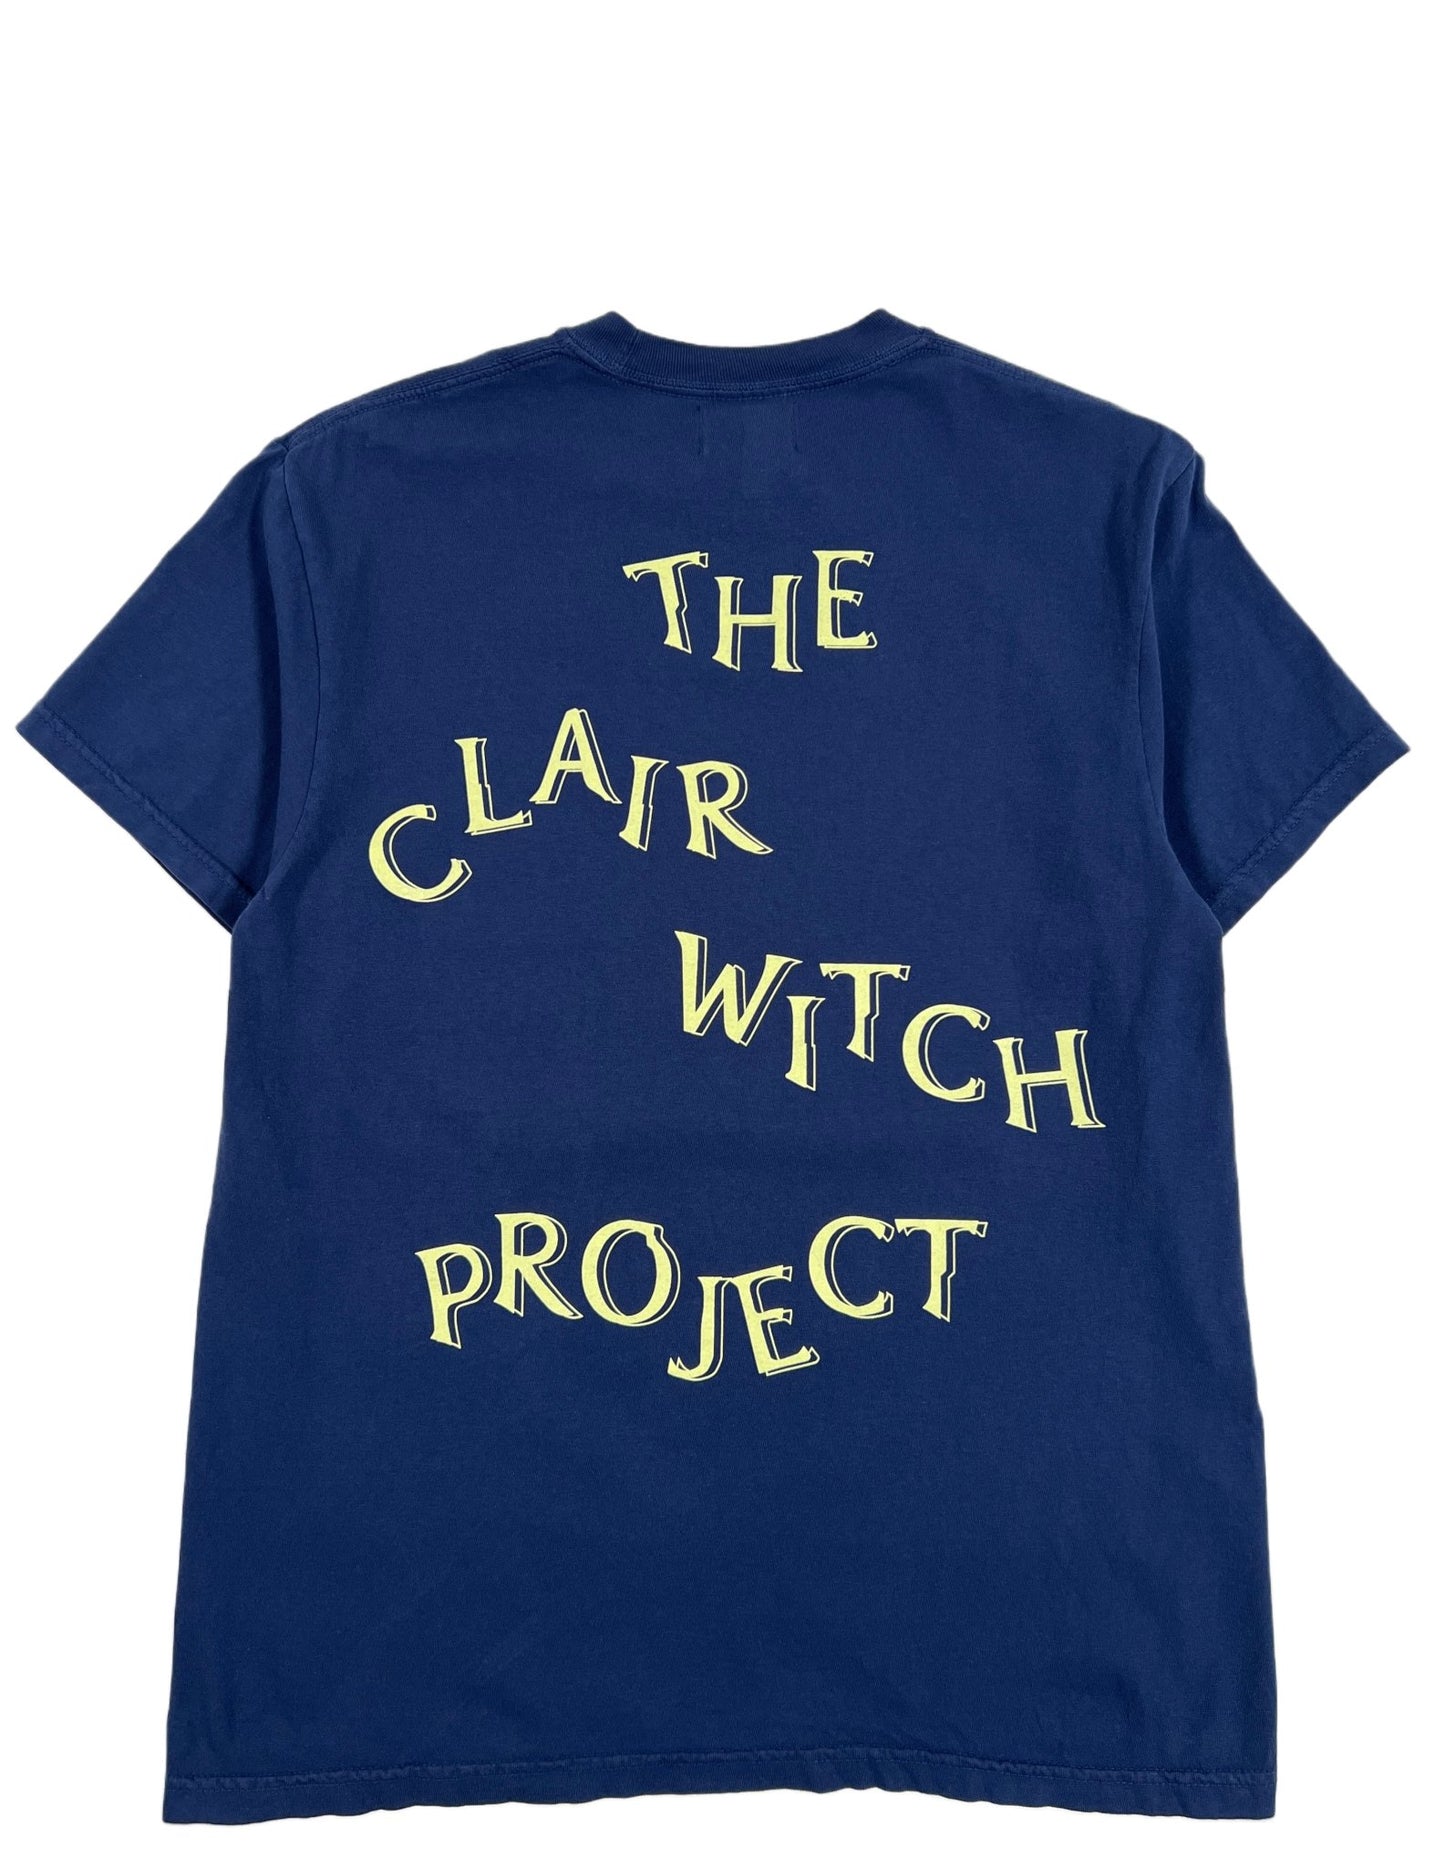 Probus SINCLAIR CLAIR WITCH TEE NAVY S